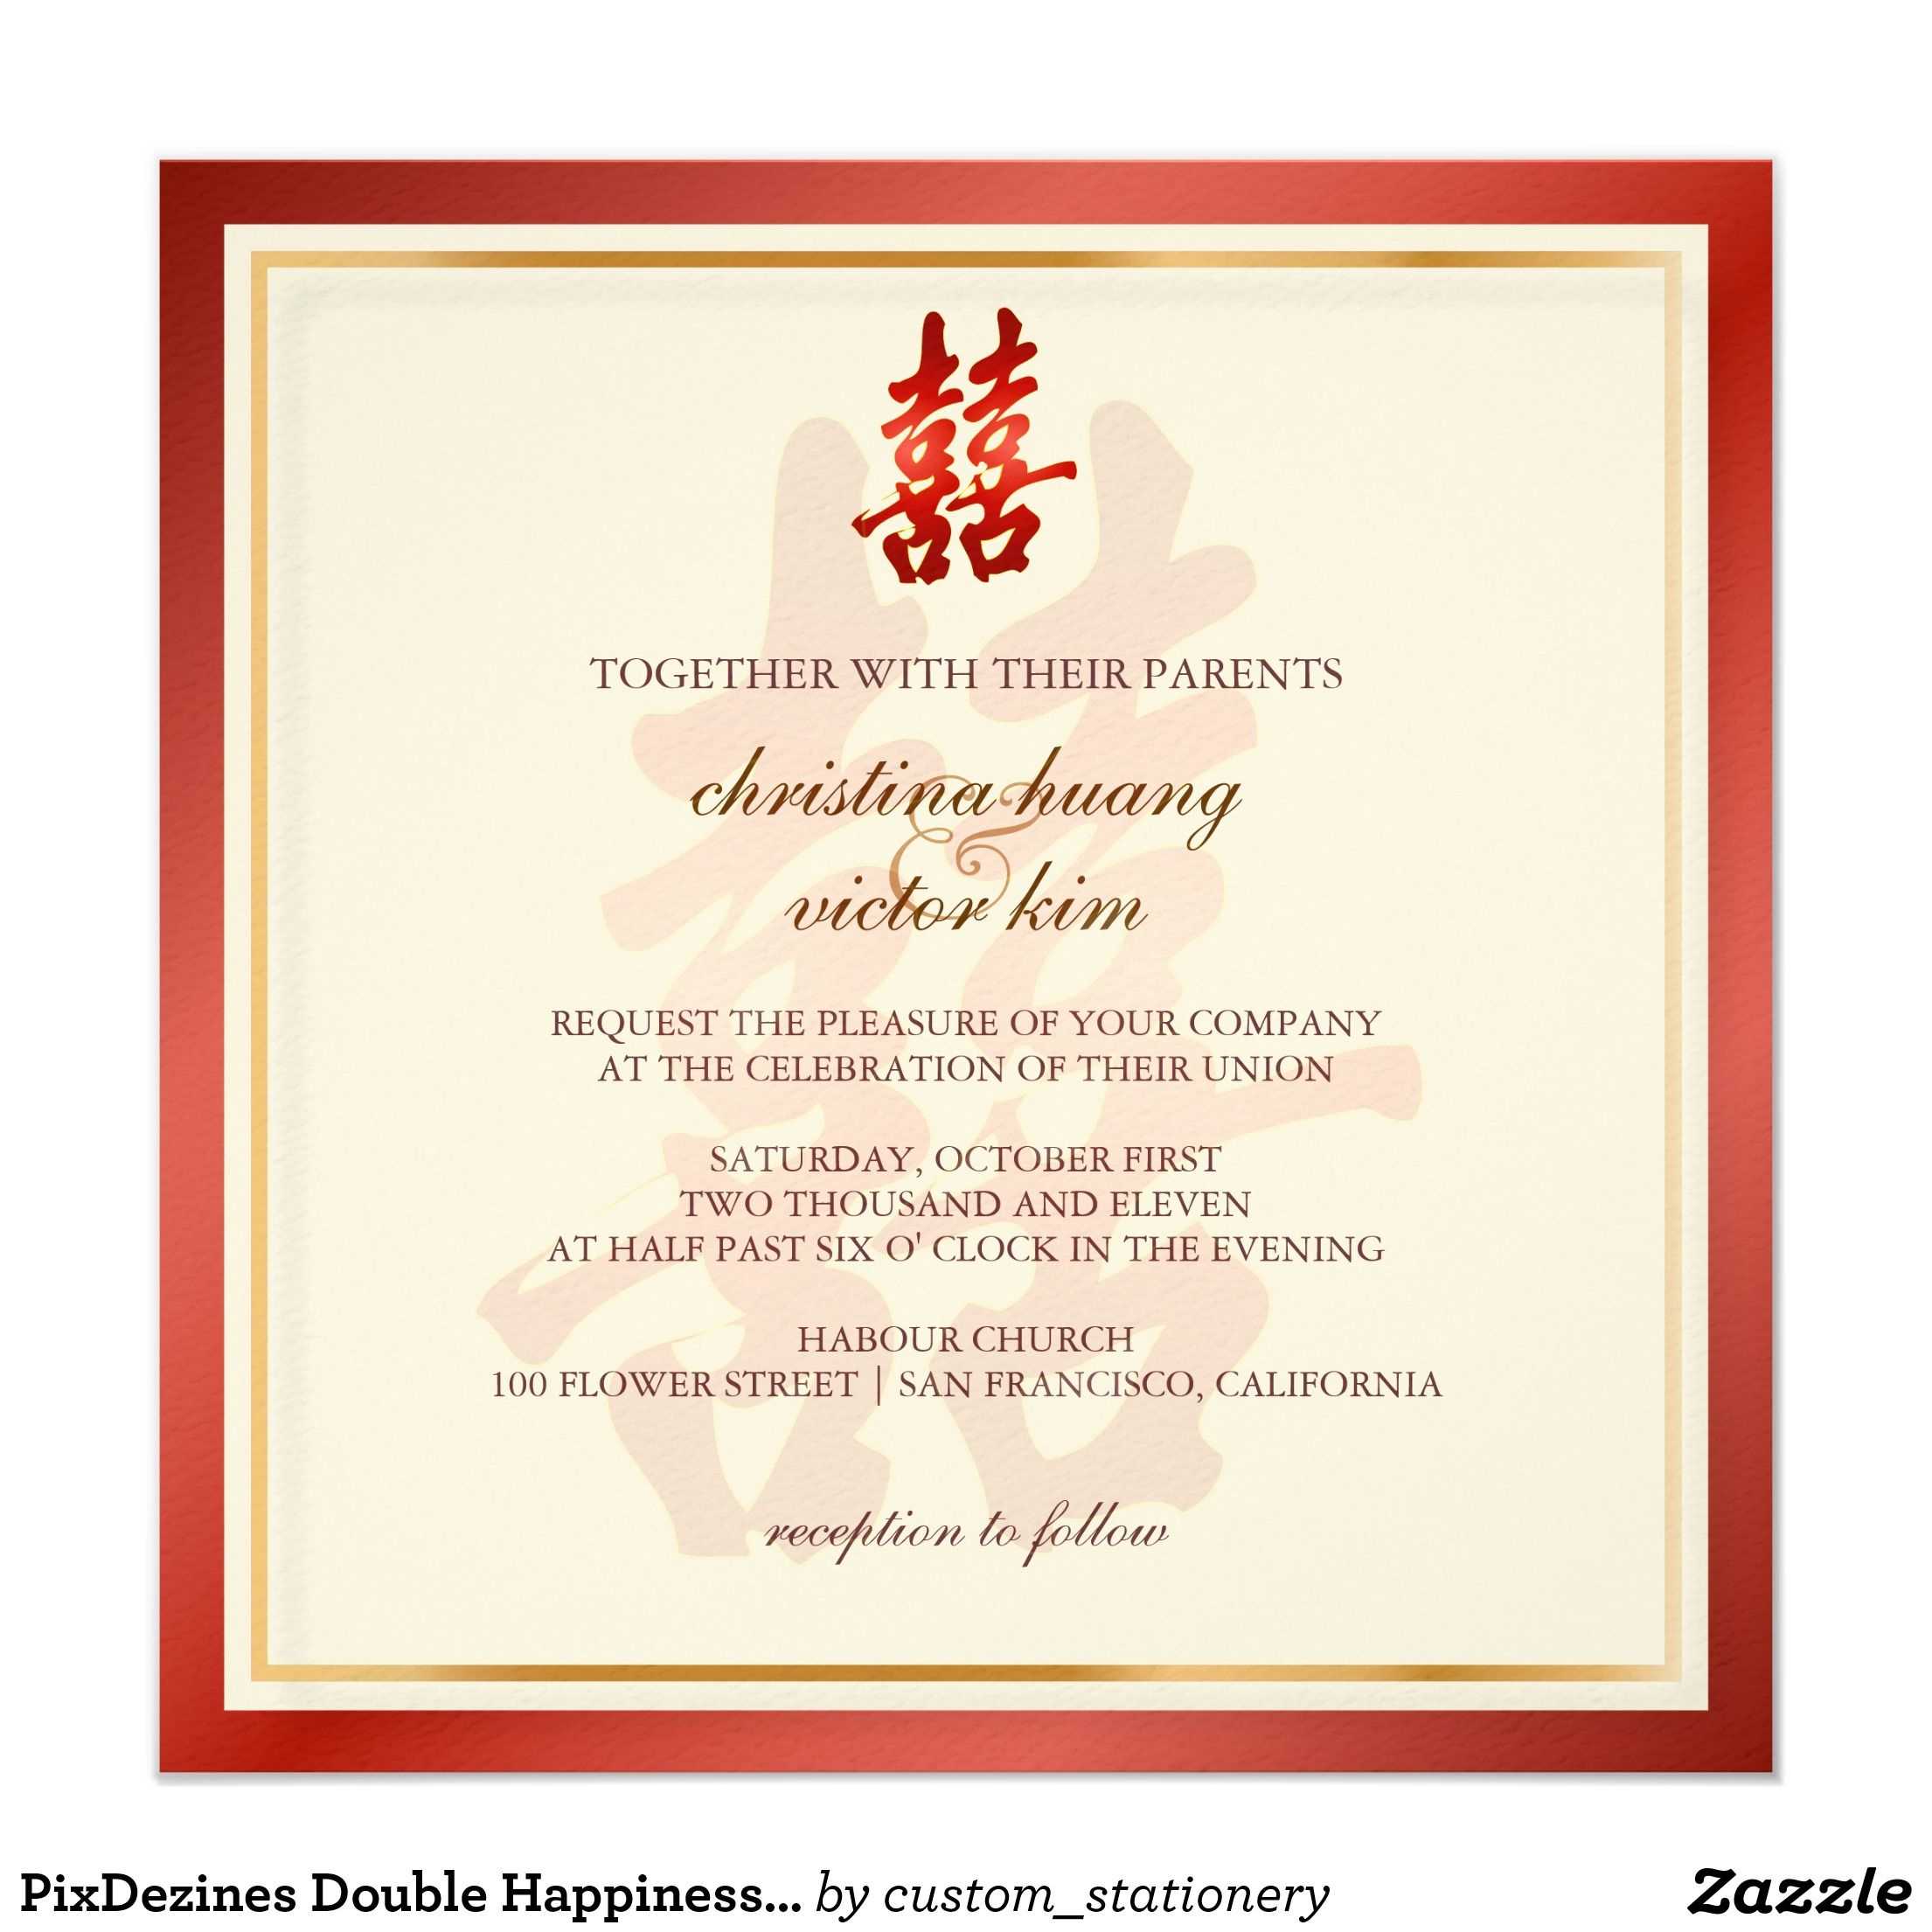 Pixdezines Double Happiness, Chinese Wedding Invitation Intended For Church Wedding Invitation Card Template